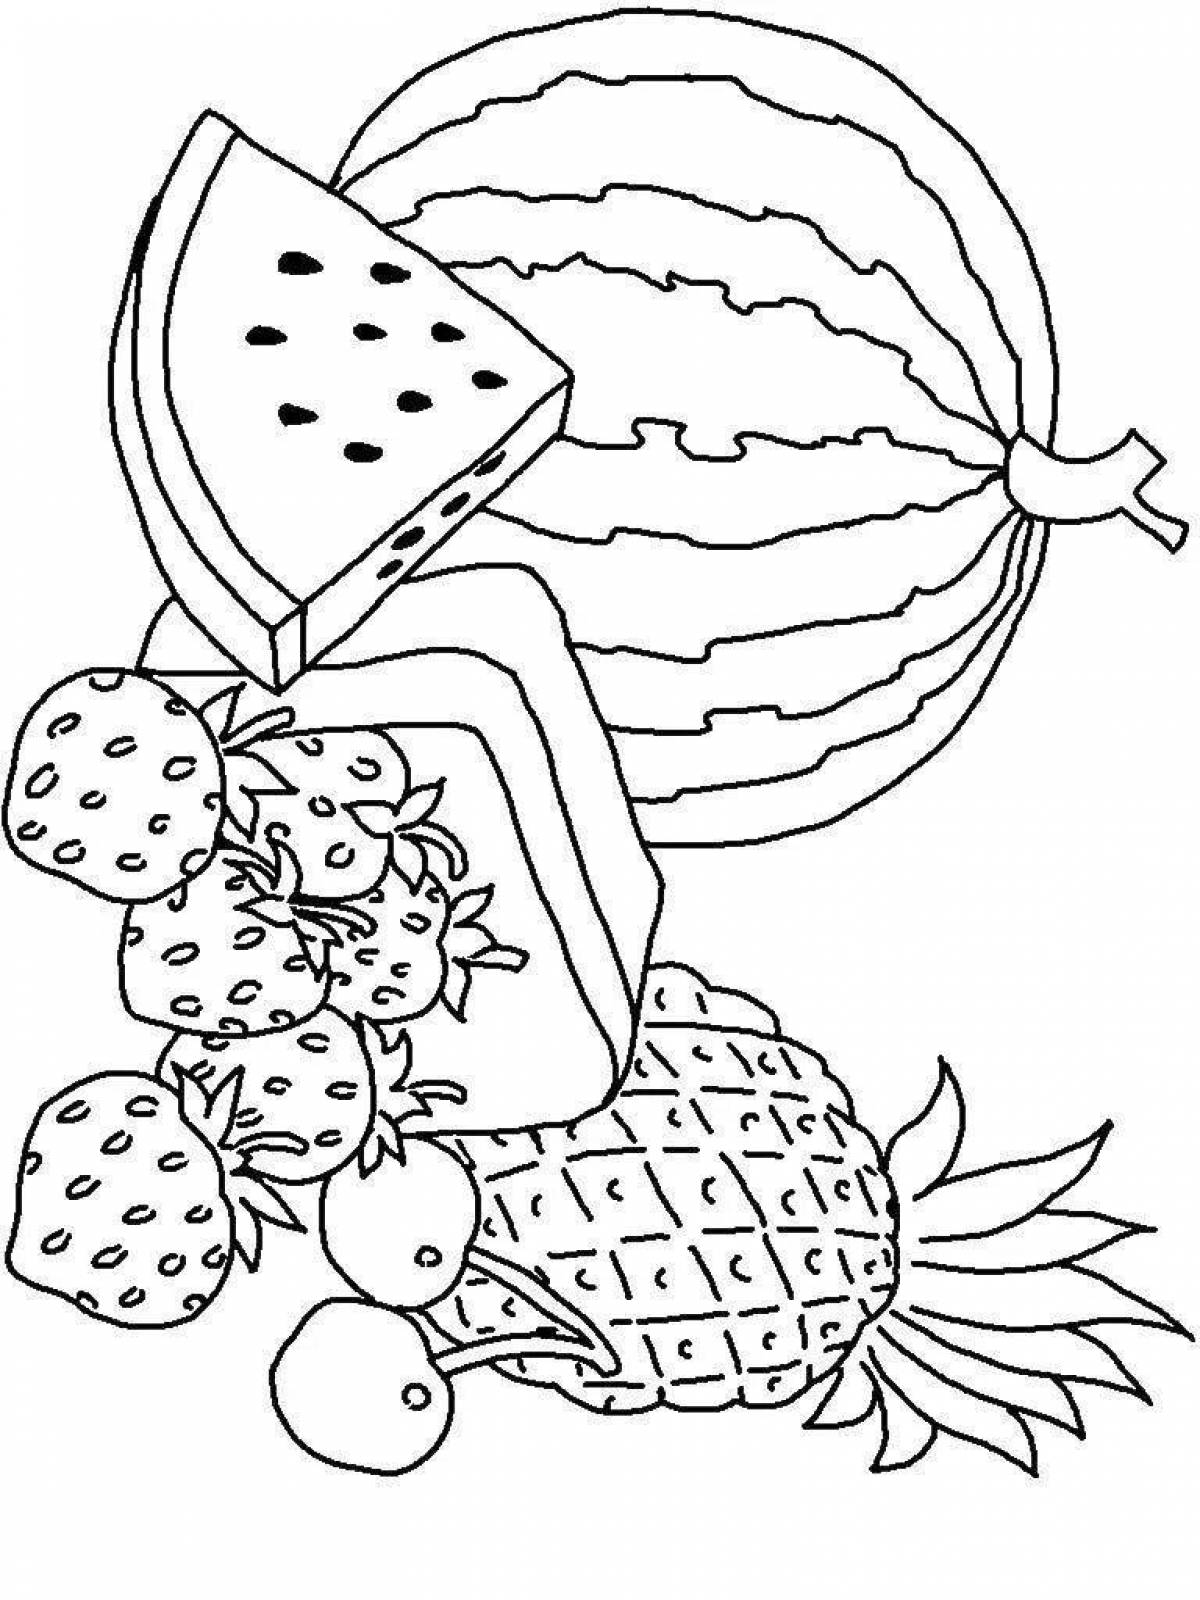 Courageous fruit and vegetable coloring book